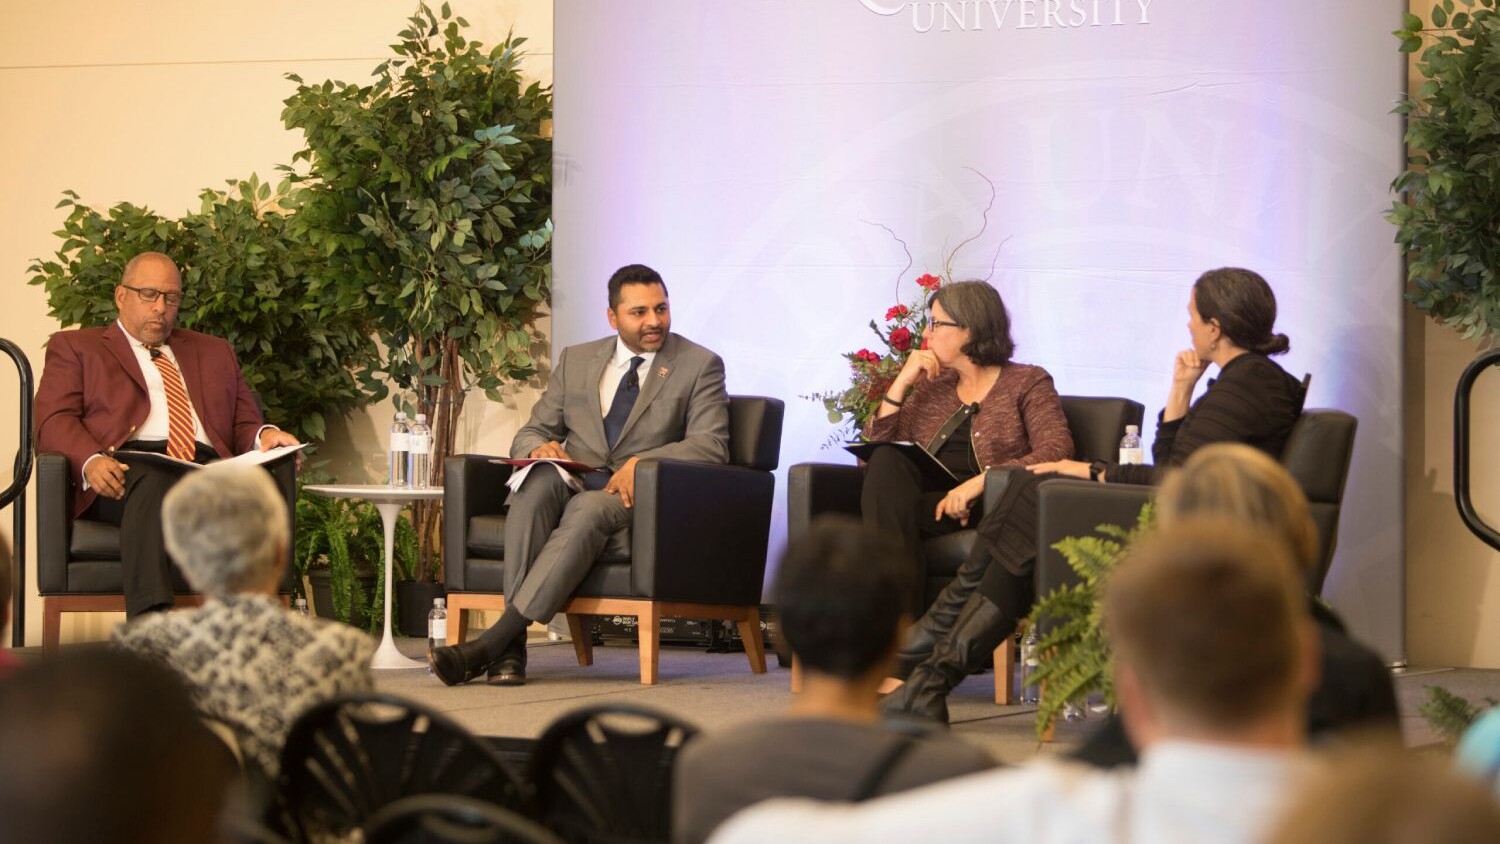 President Nair sits on stage with a panel of speakers